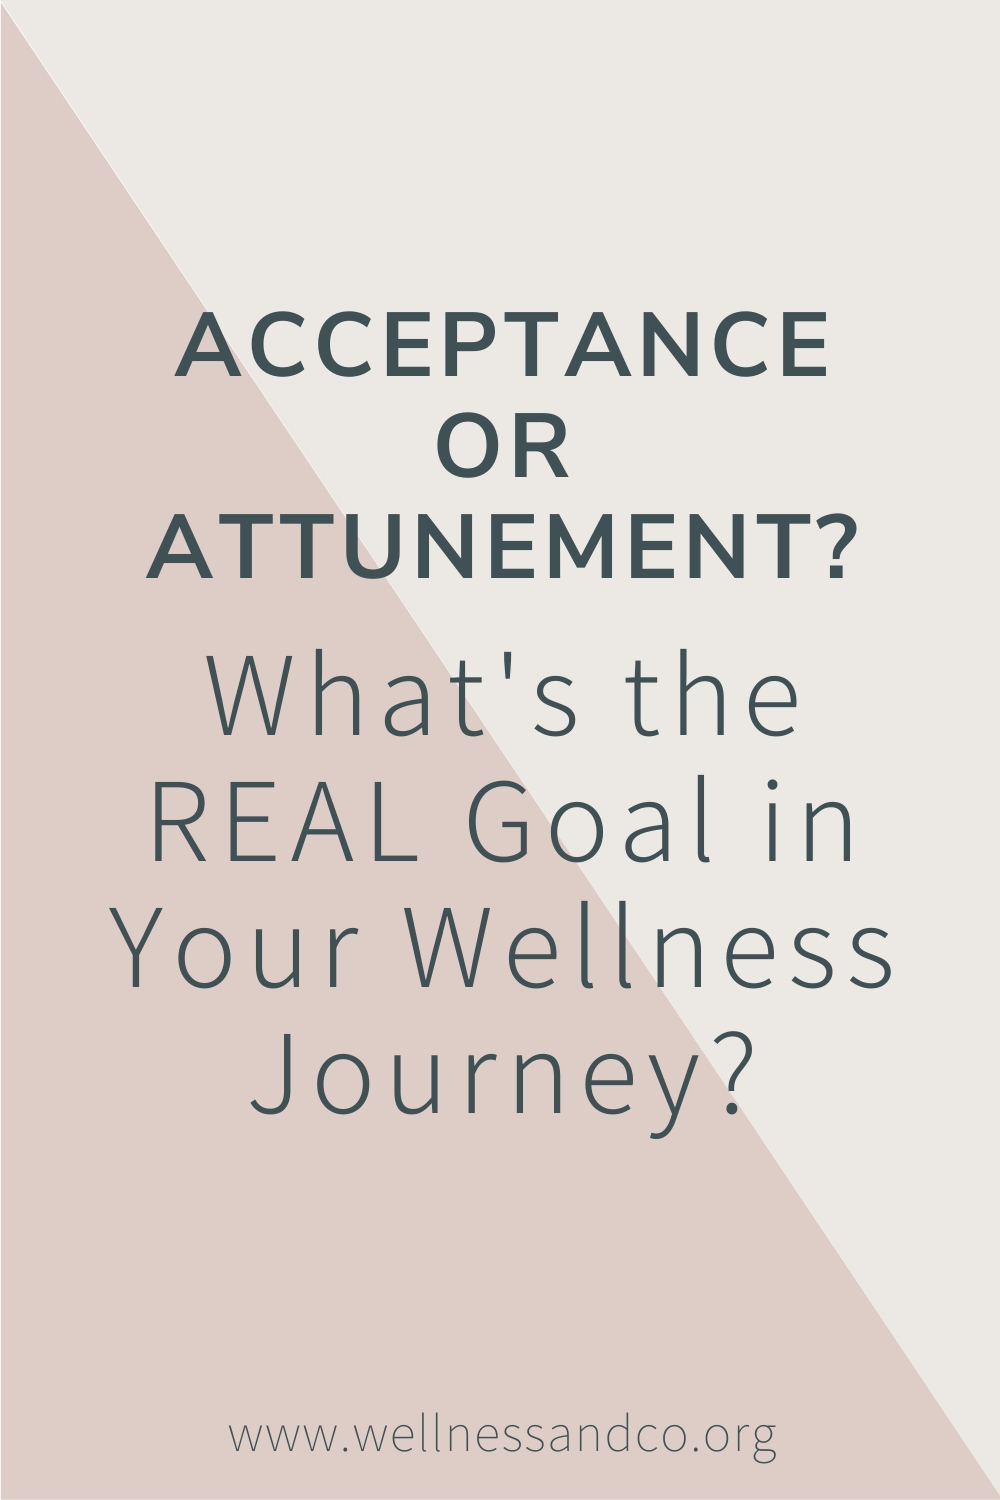 Acceptance or Attunement? What's the REAL Goals in Your Wellness Journey? | If I had a dollar for every time a client said someone told them to "move on, get over it, let it go." Ouch! Our culture loves this idea of acceptance but do we every truly accept something? Learn more about the difference between acceptance and attunement, which one is super healthy, and why the difference can change the way you process everything. Cheers!